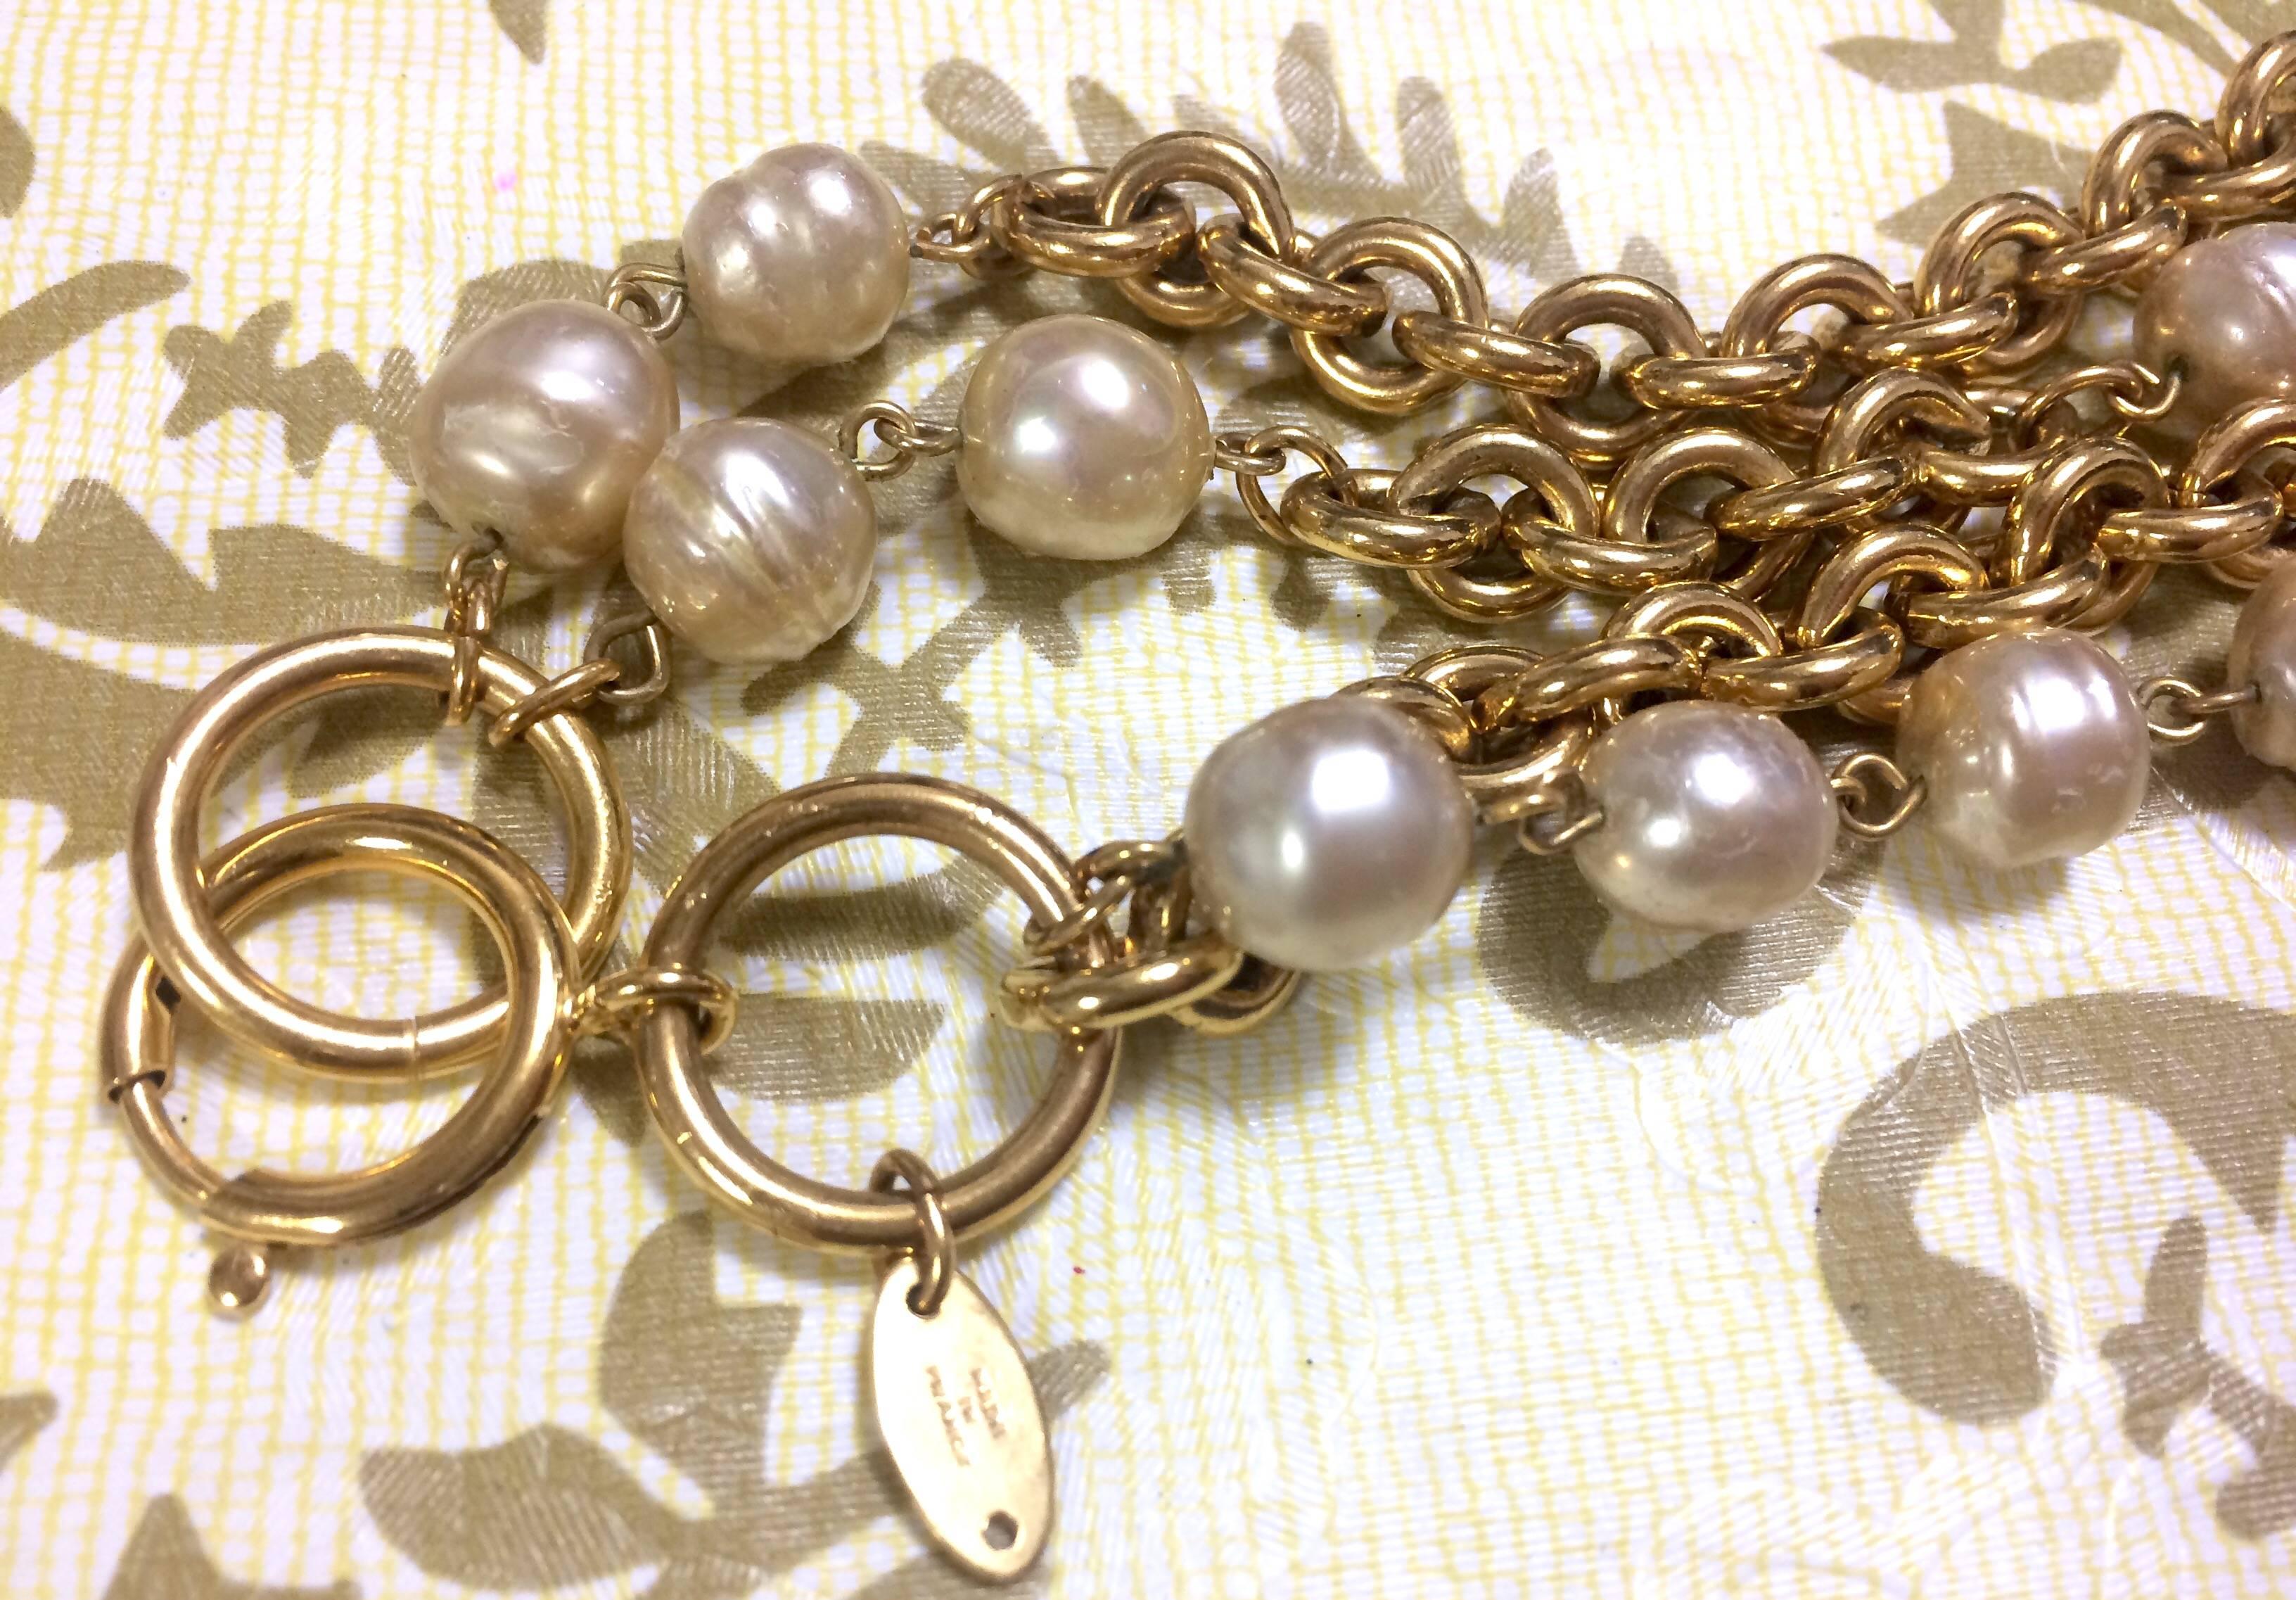  Vintage CHANEL double layer long chain necklace with baroque faux pearls. 1